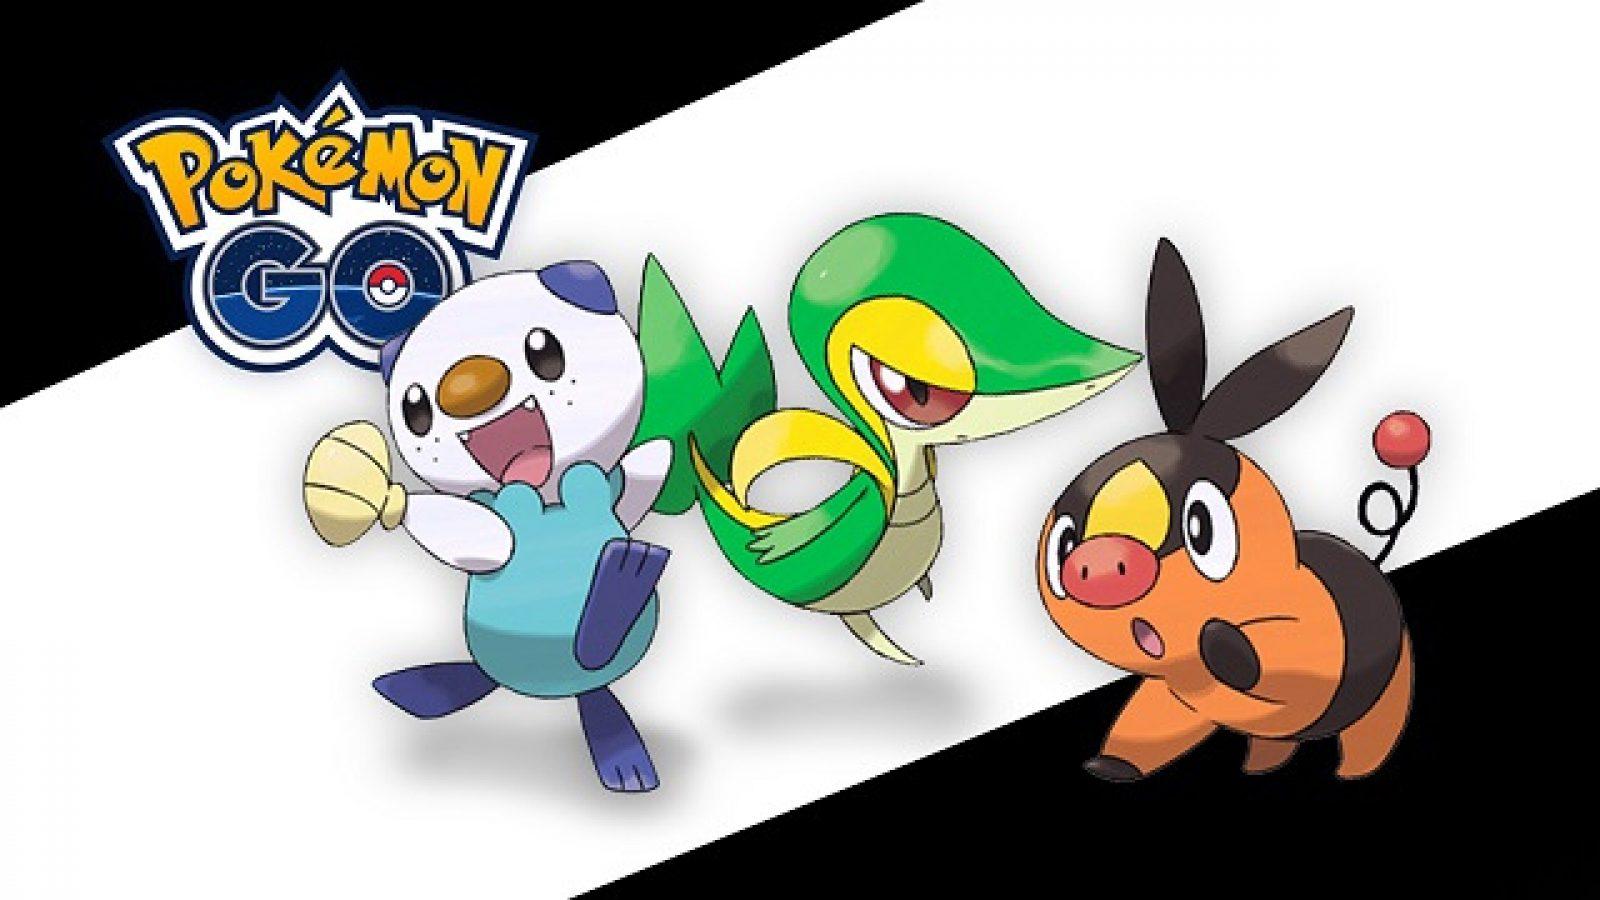 Pokemon Go Gen 5 Pokemon arrive today – Here's what you can catch, and when  - Daily Star